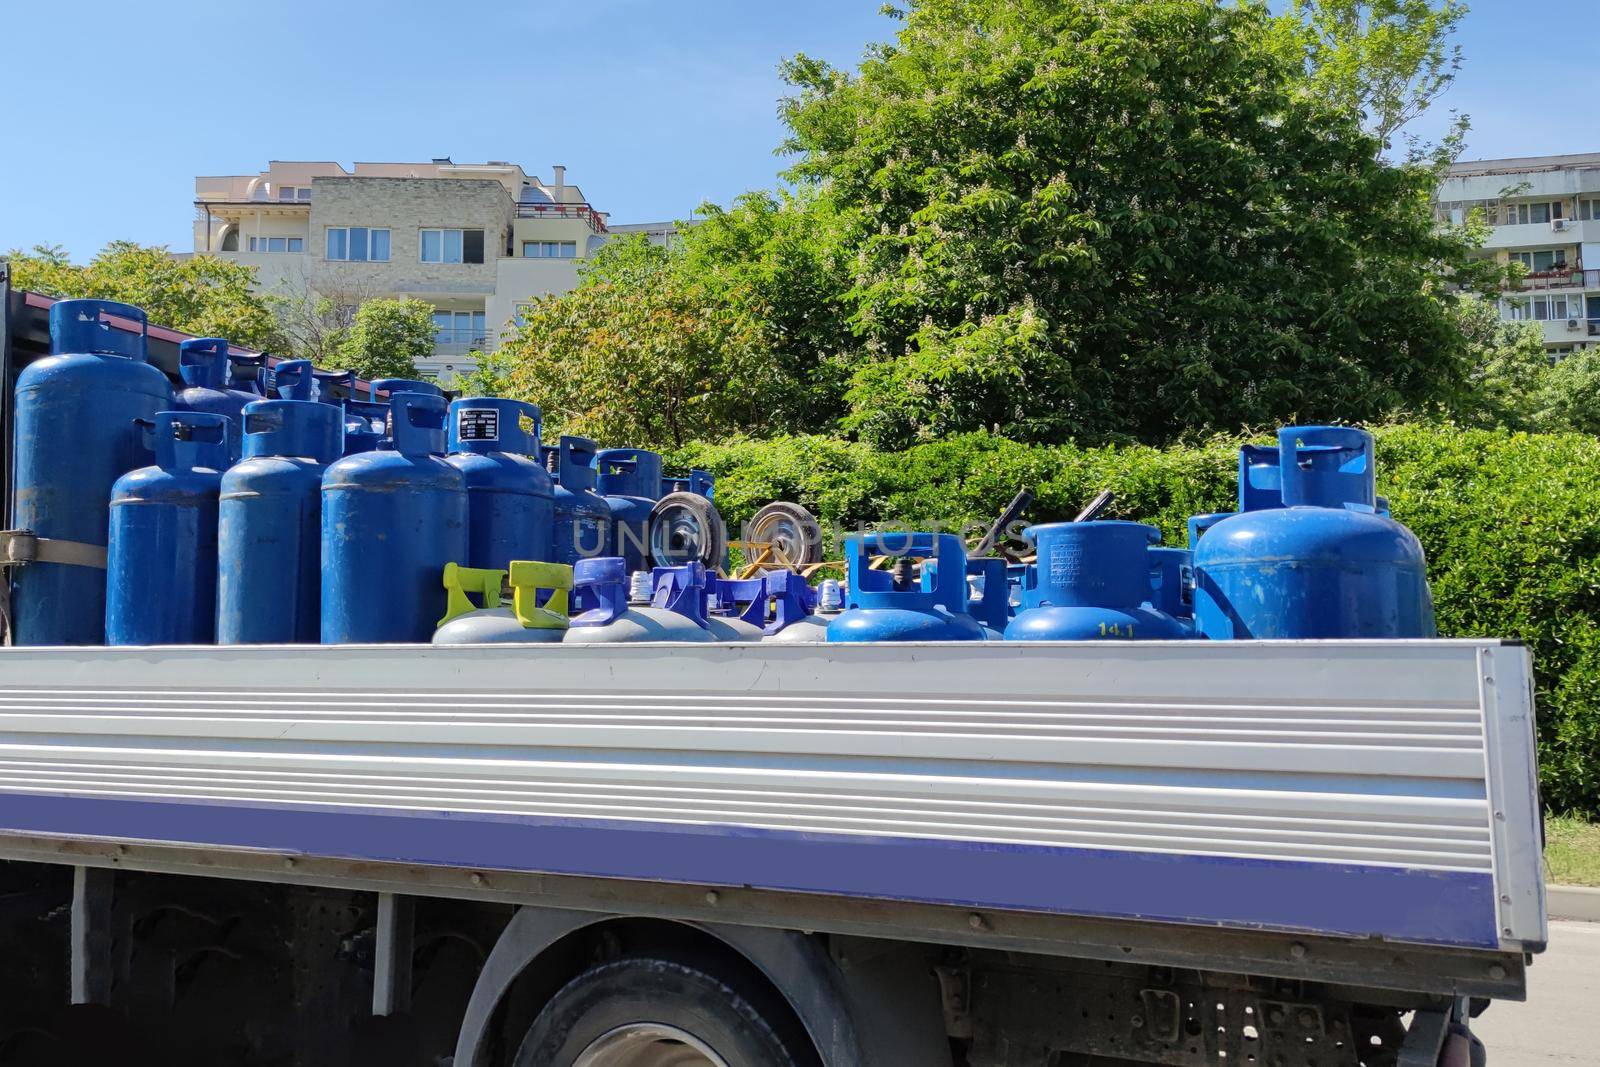 truck carries blue gas cylinders in an open body by Annado